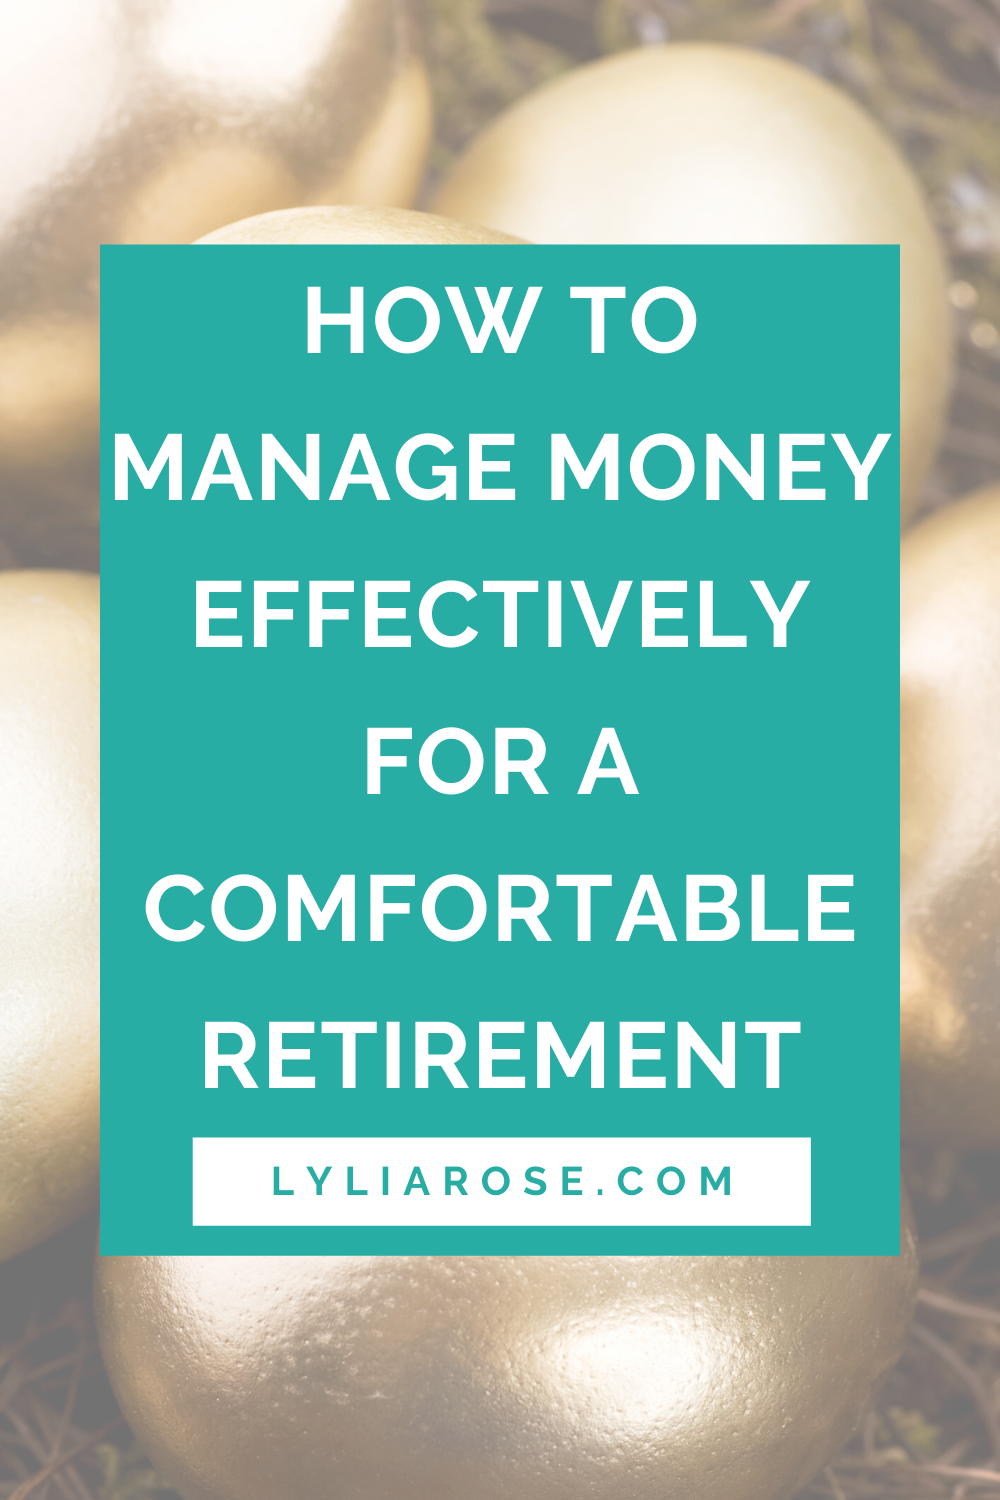 How to manage money effectively for a comfortable retirement